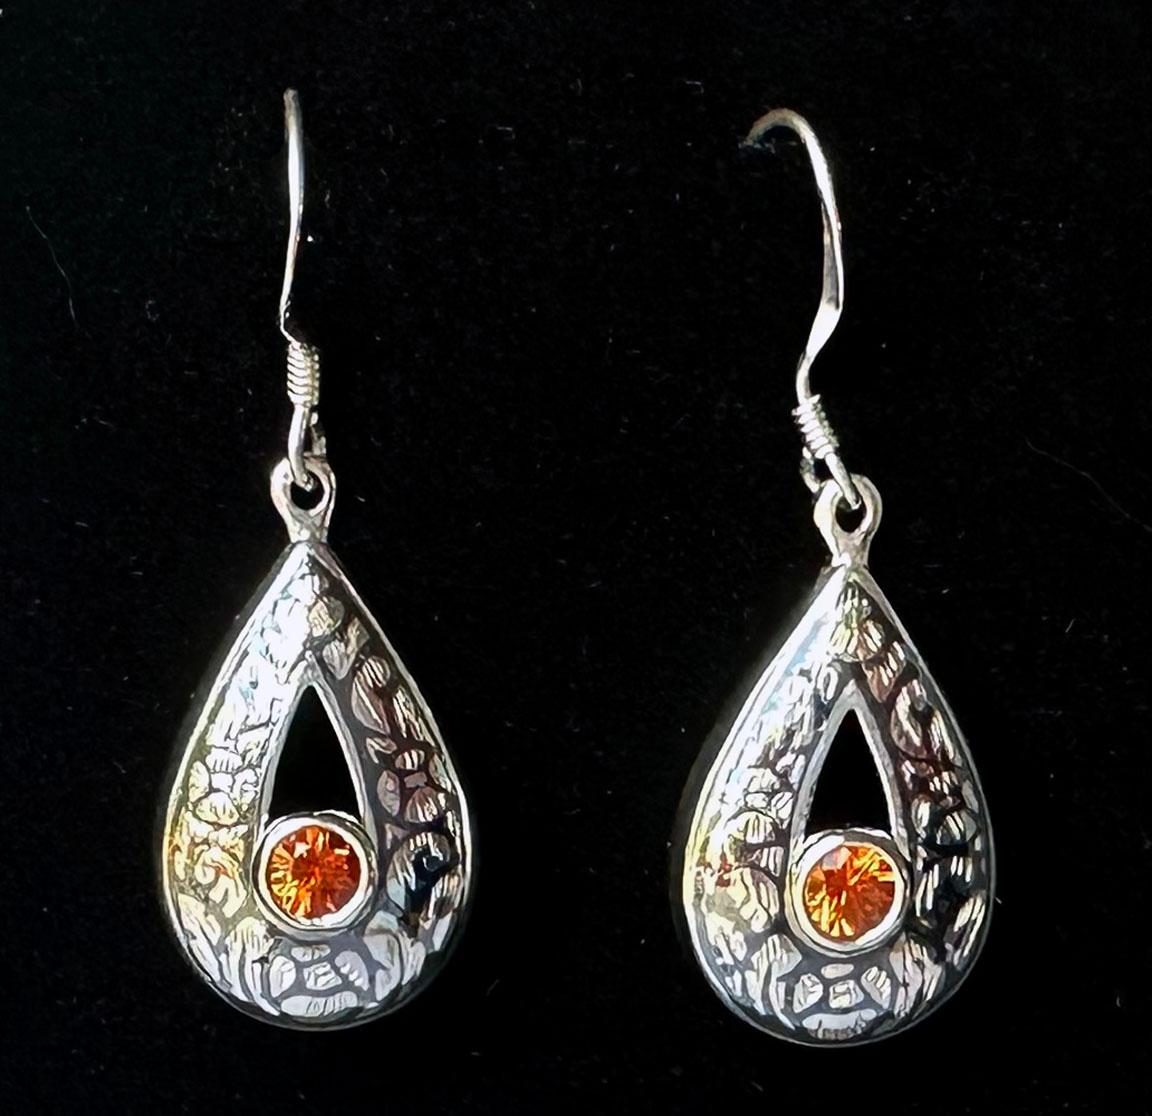 Silver Nielloware Earrings set with Orange Sapphires. 

Nielloware is a Thai Silver craft that is practiced in the southern provinces of Thailand. Using a blackened Nickel Alloy to inlay a cultural design into the Silver, the alloy provides a stark